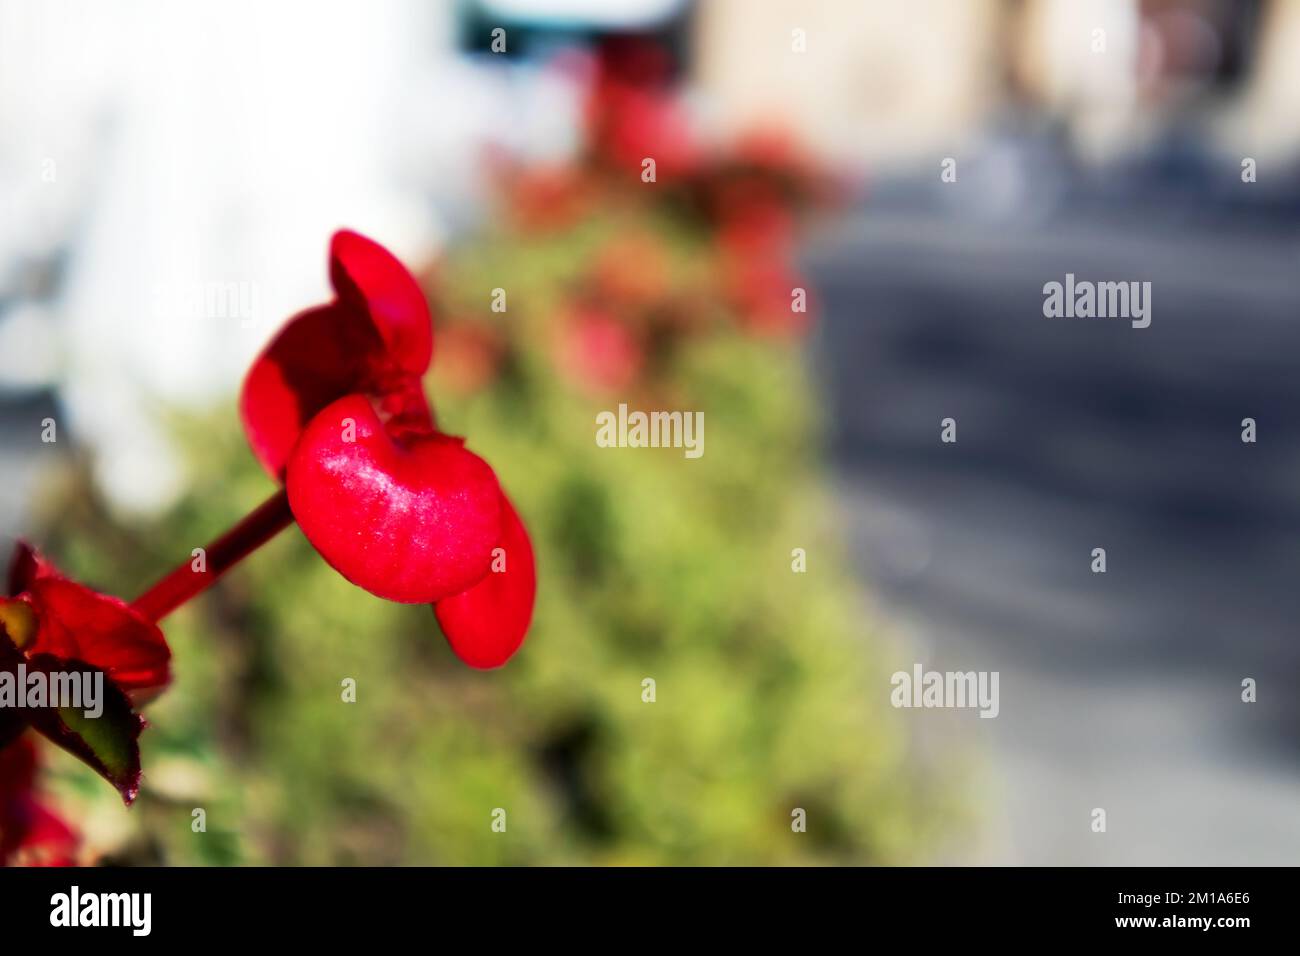 A bright red flower with a green and gray backgound Stock Photo